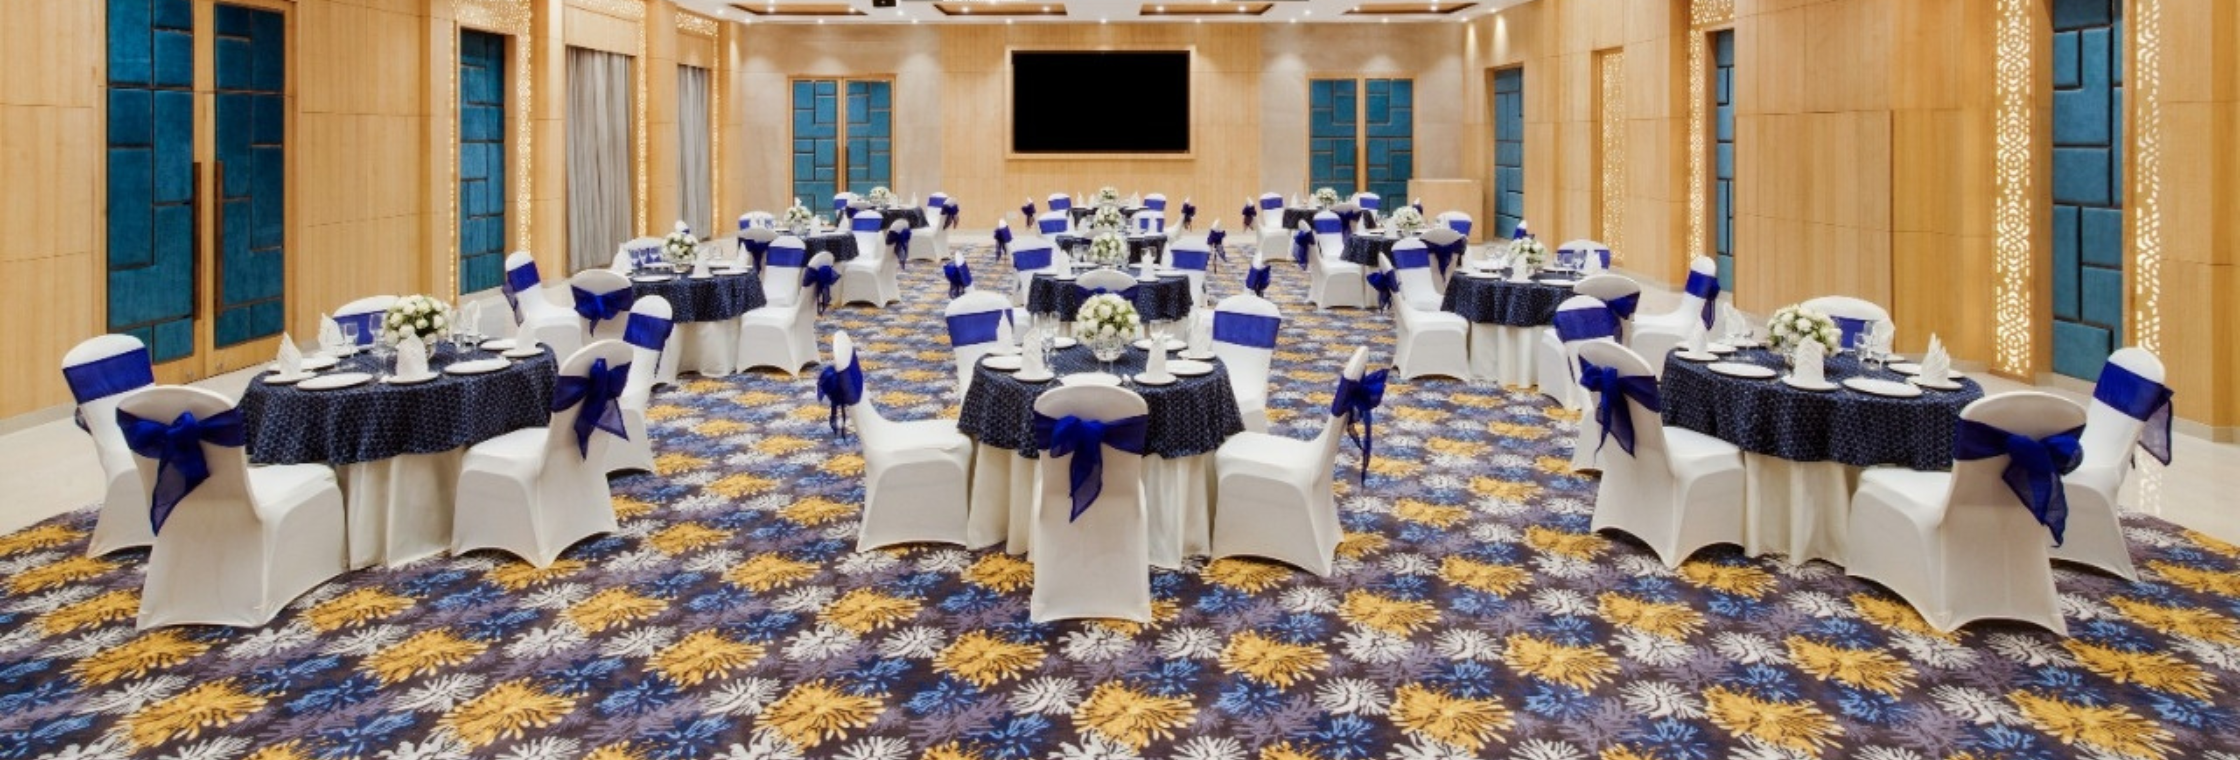 Amenities And Facilities​ of event centre